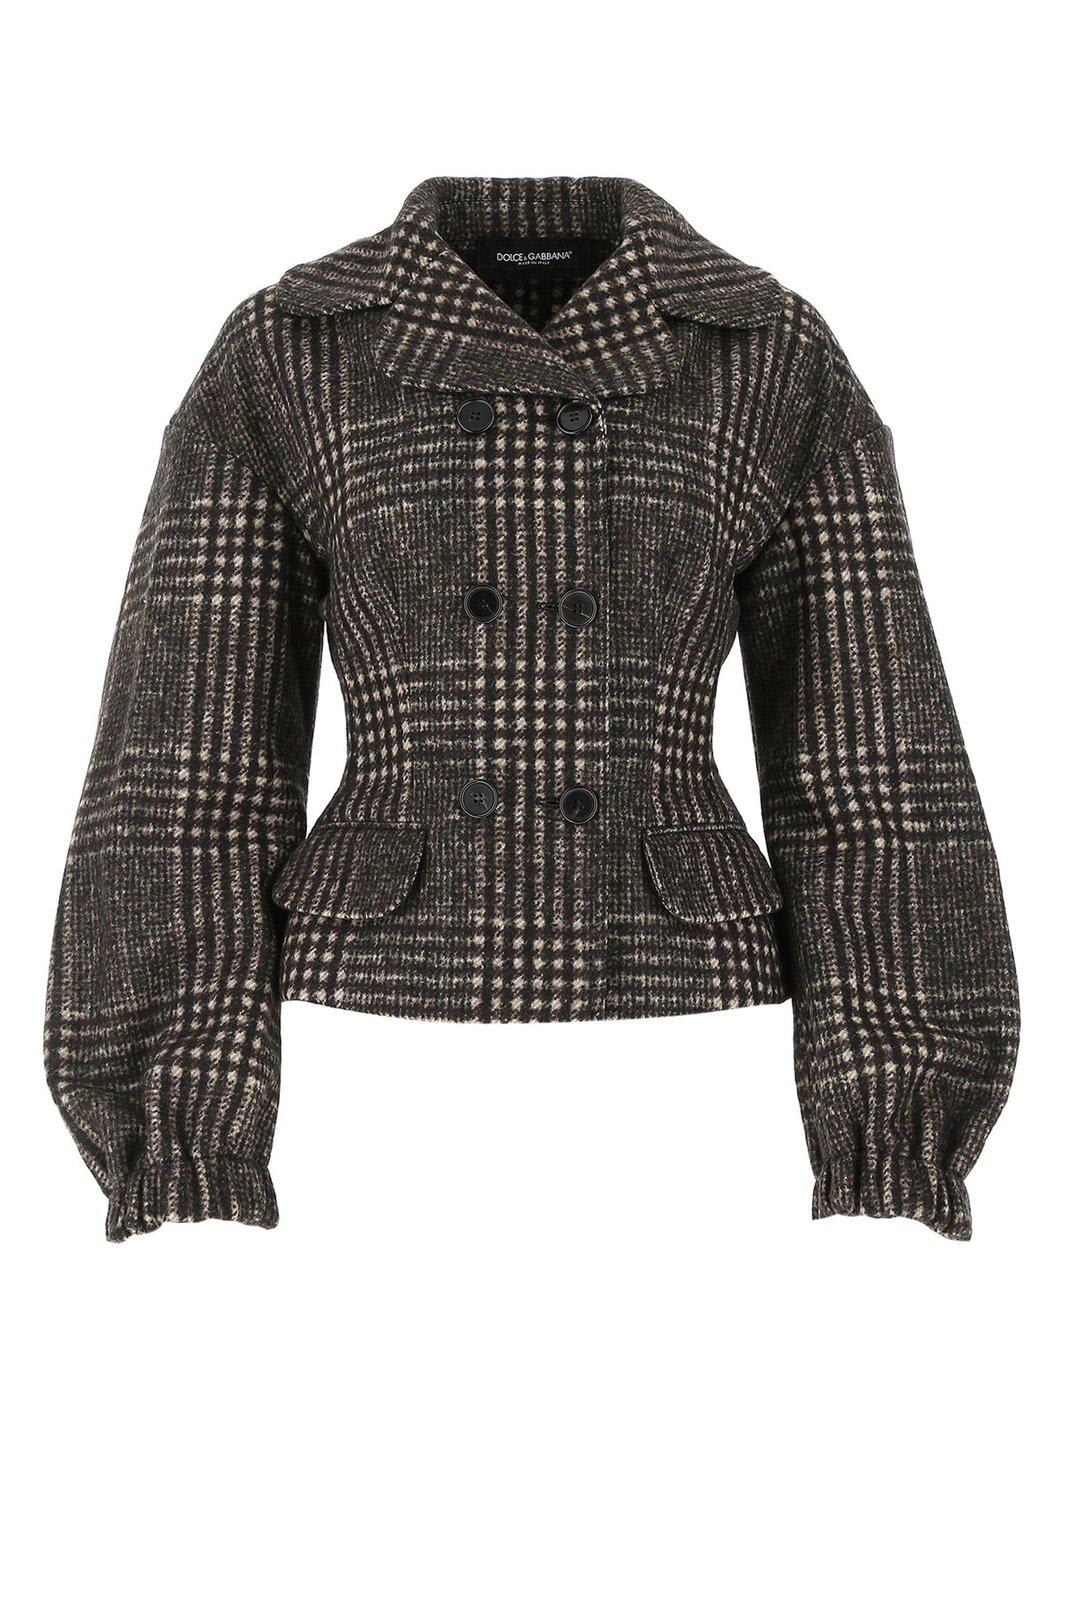 Dolce & Gabbana Checked Buttoned Jacket